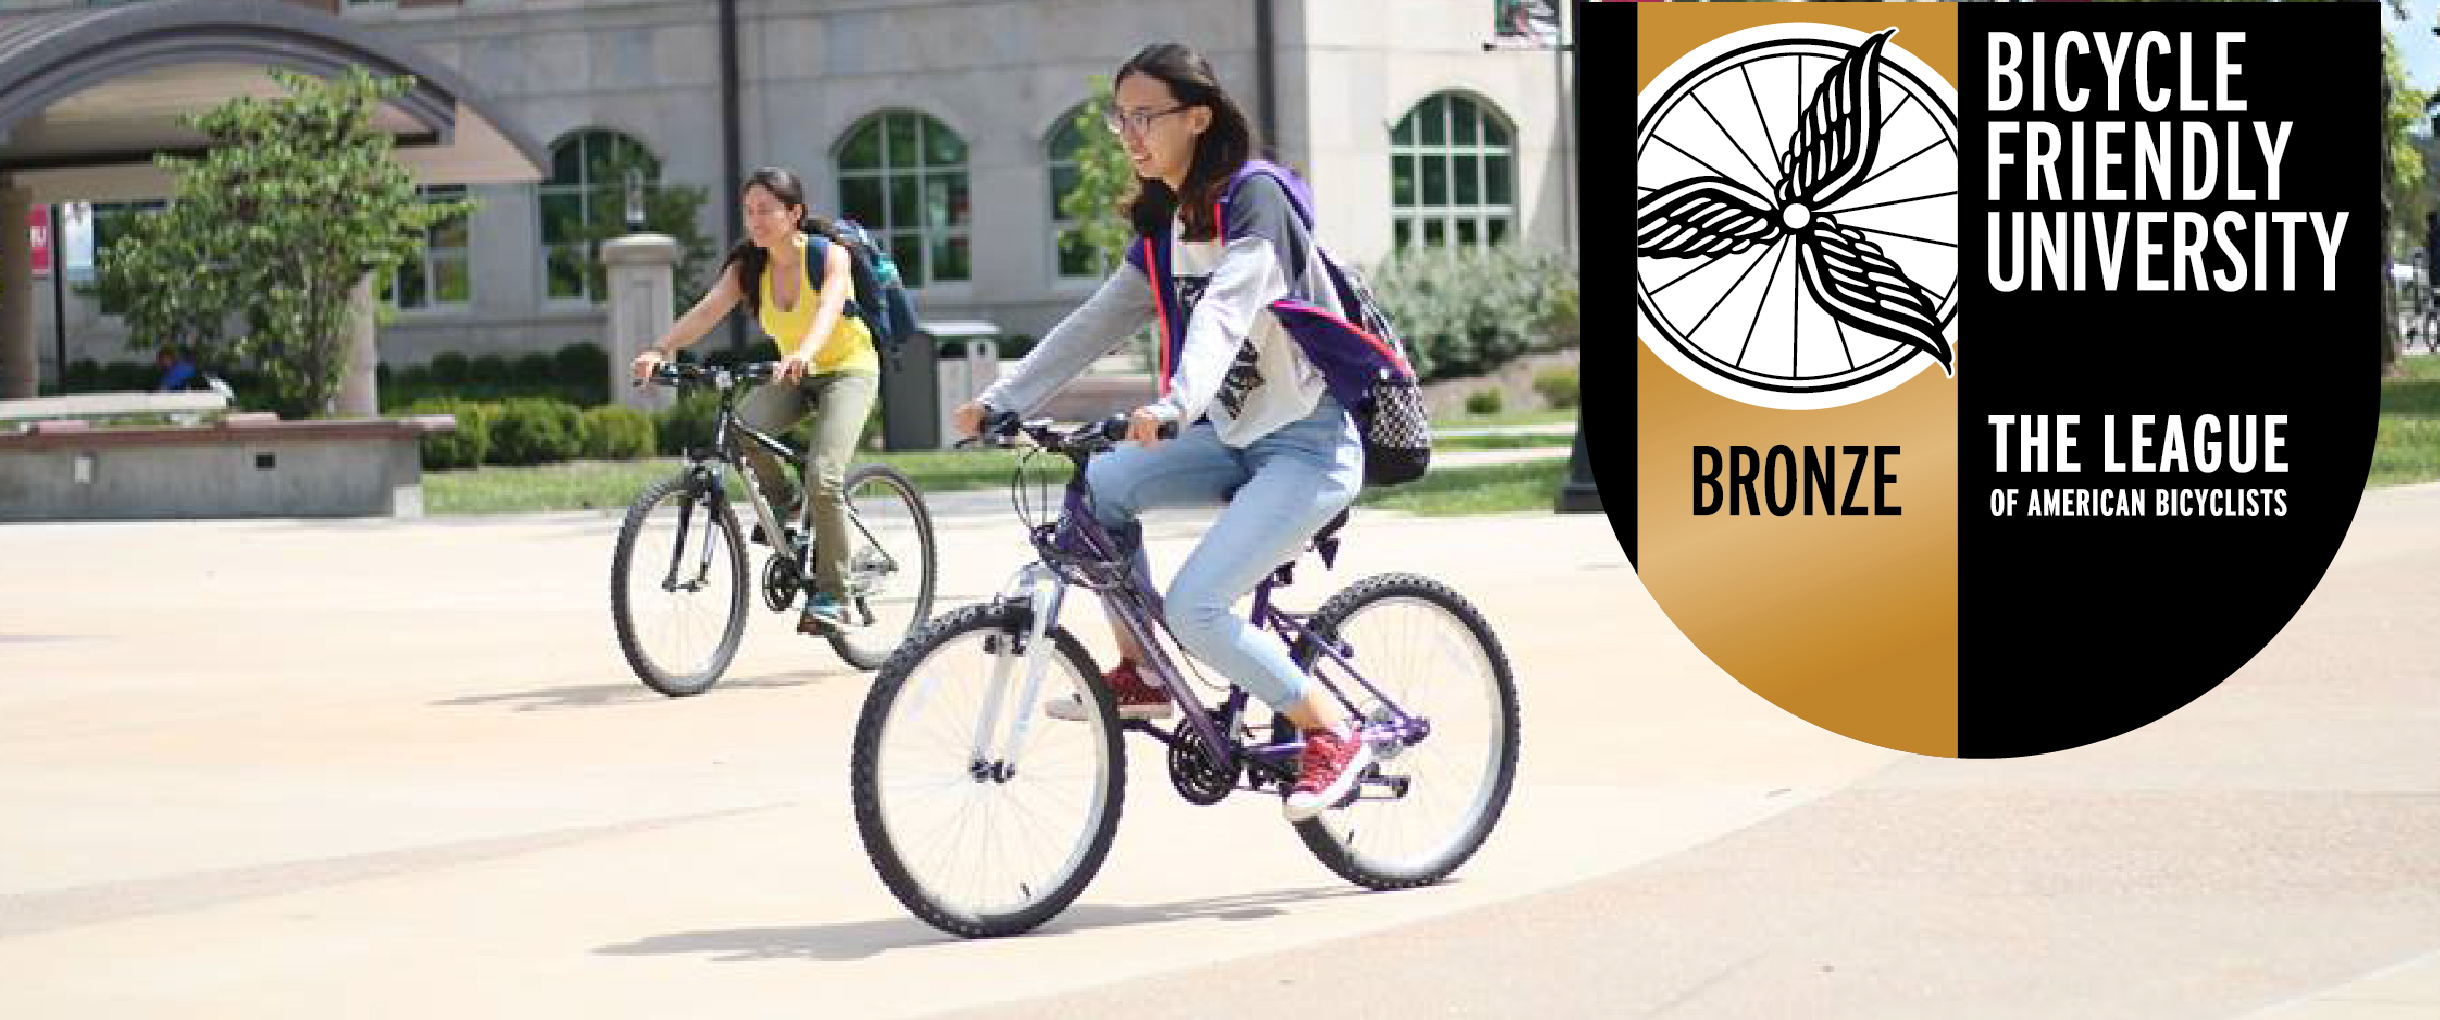 bicycle friendly university bronze, The League of American Bicyclists